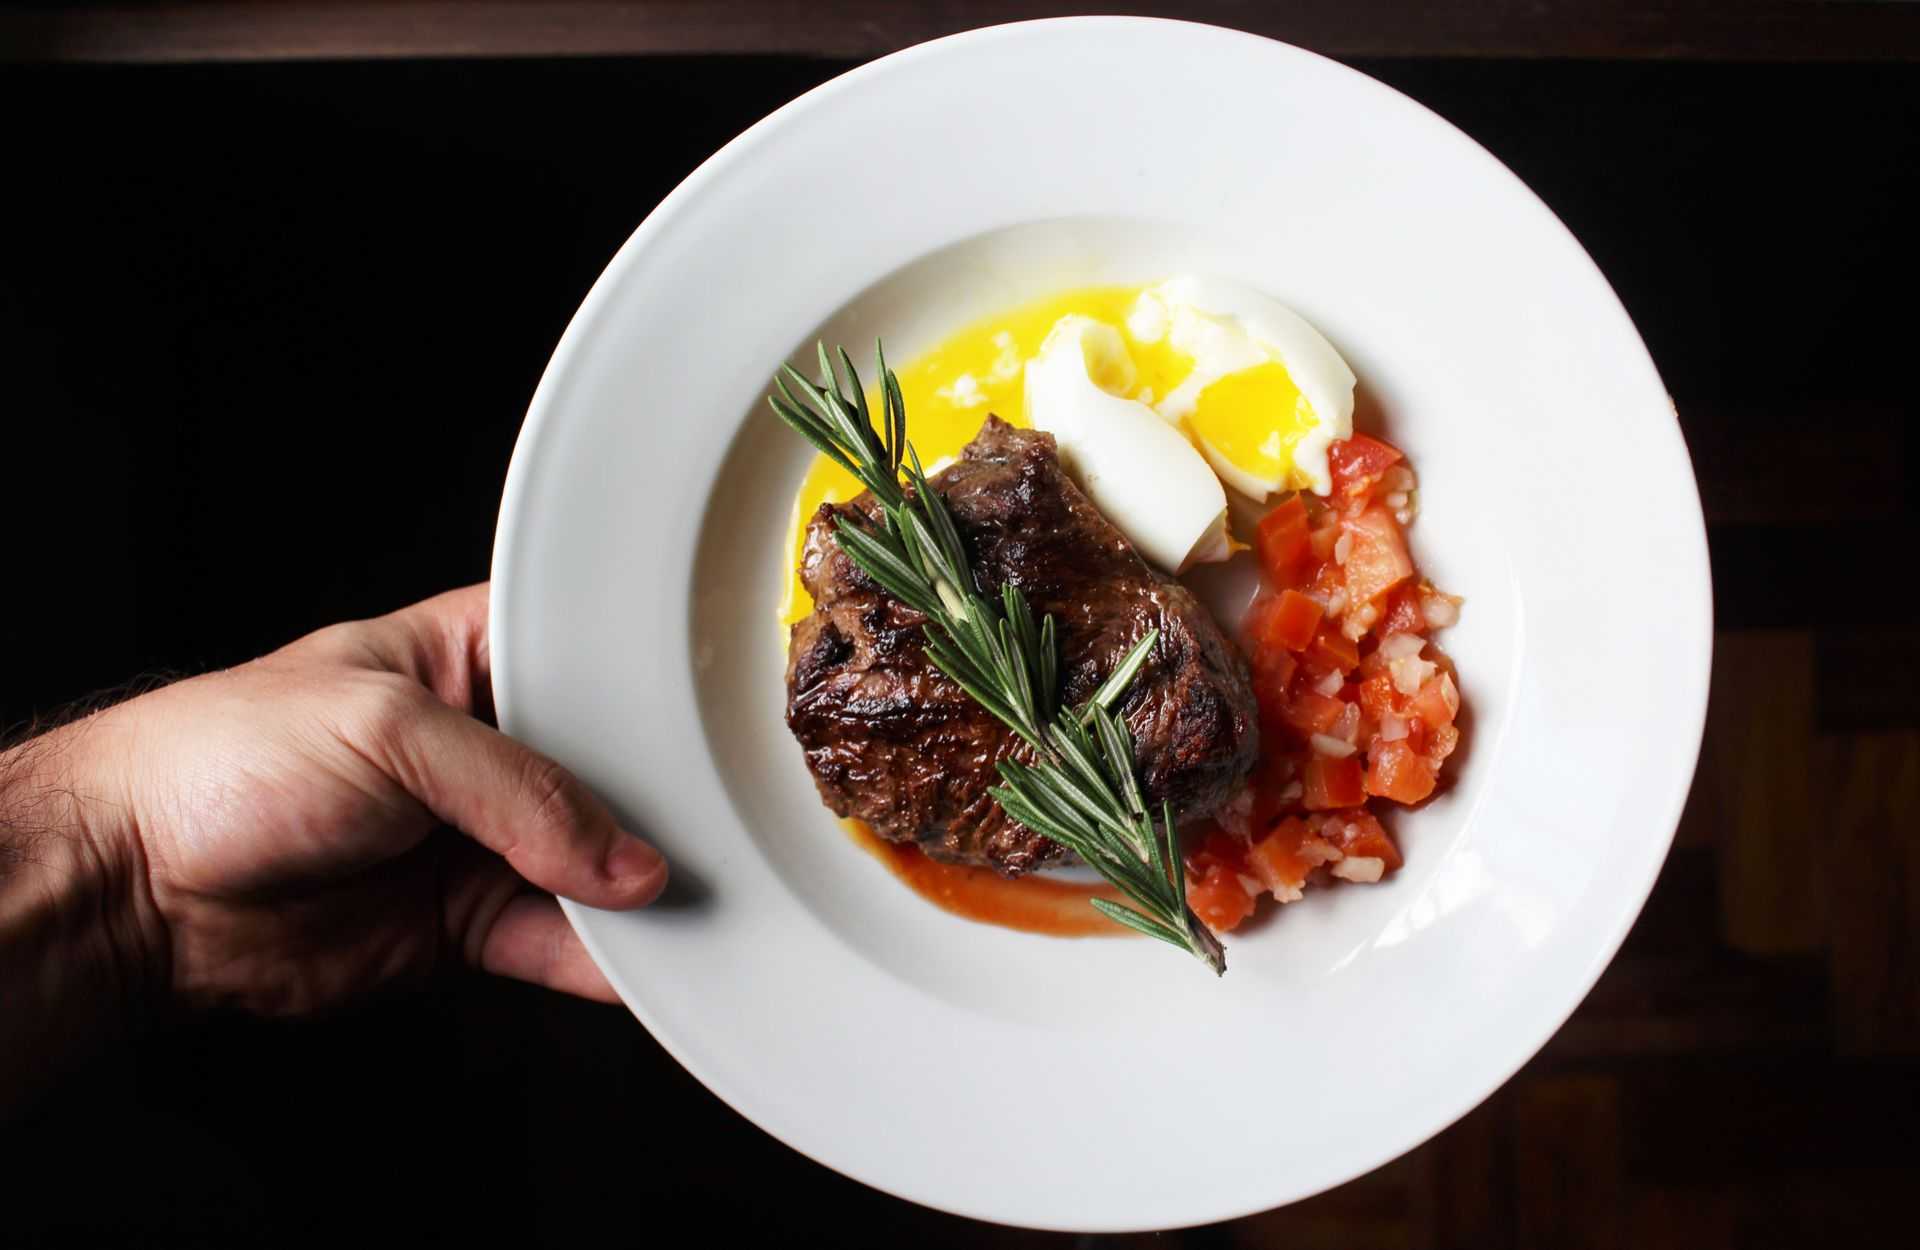 Steak and eggs with a side of tomatoes